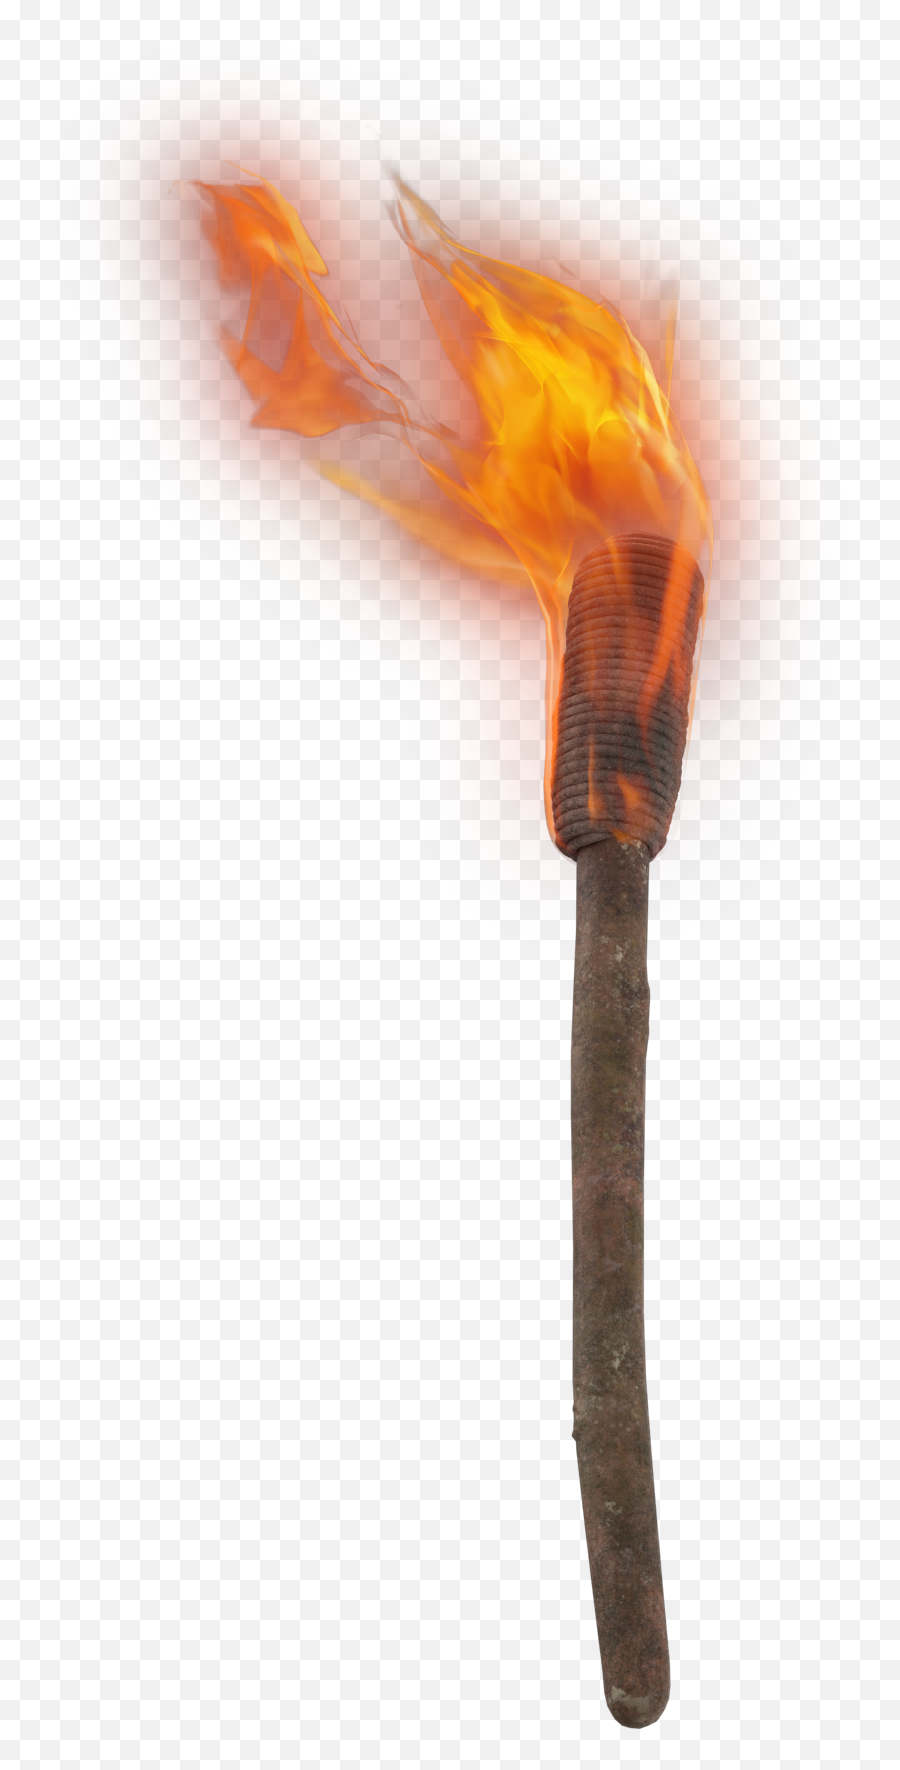 Hand Torch Png Image For Free Download - Flame,Torch Transparent